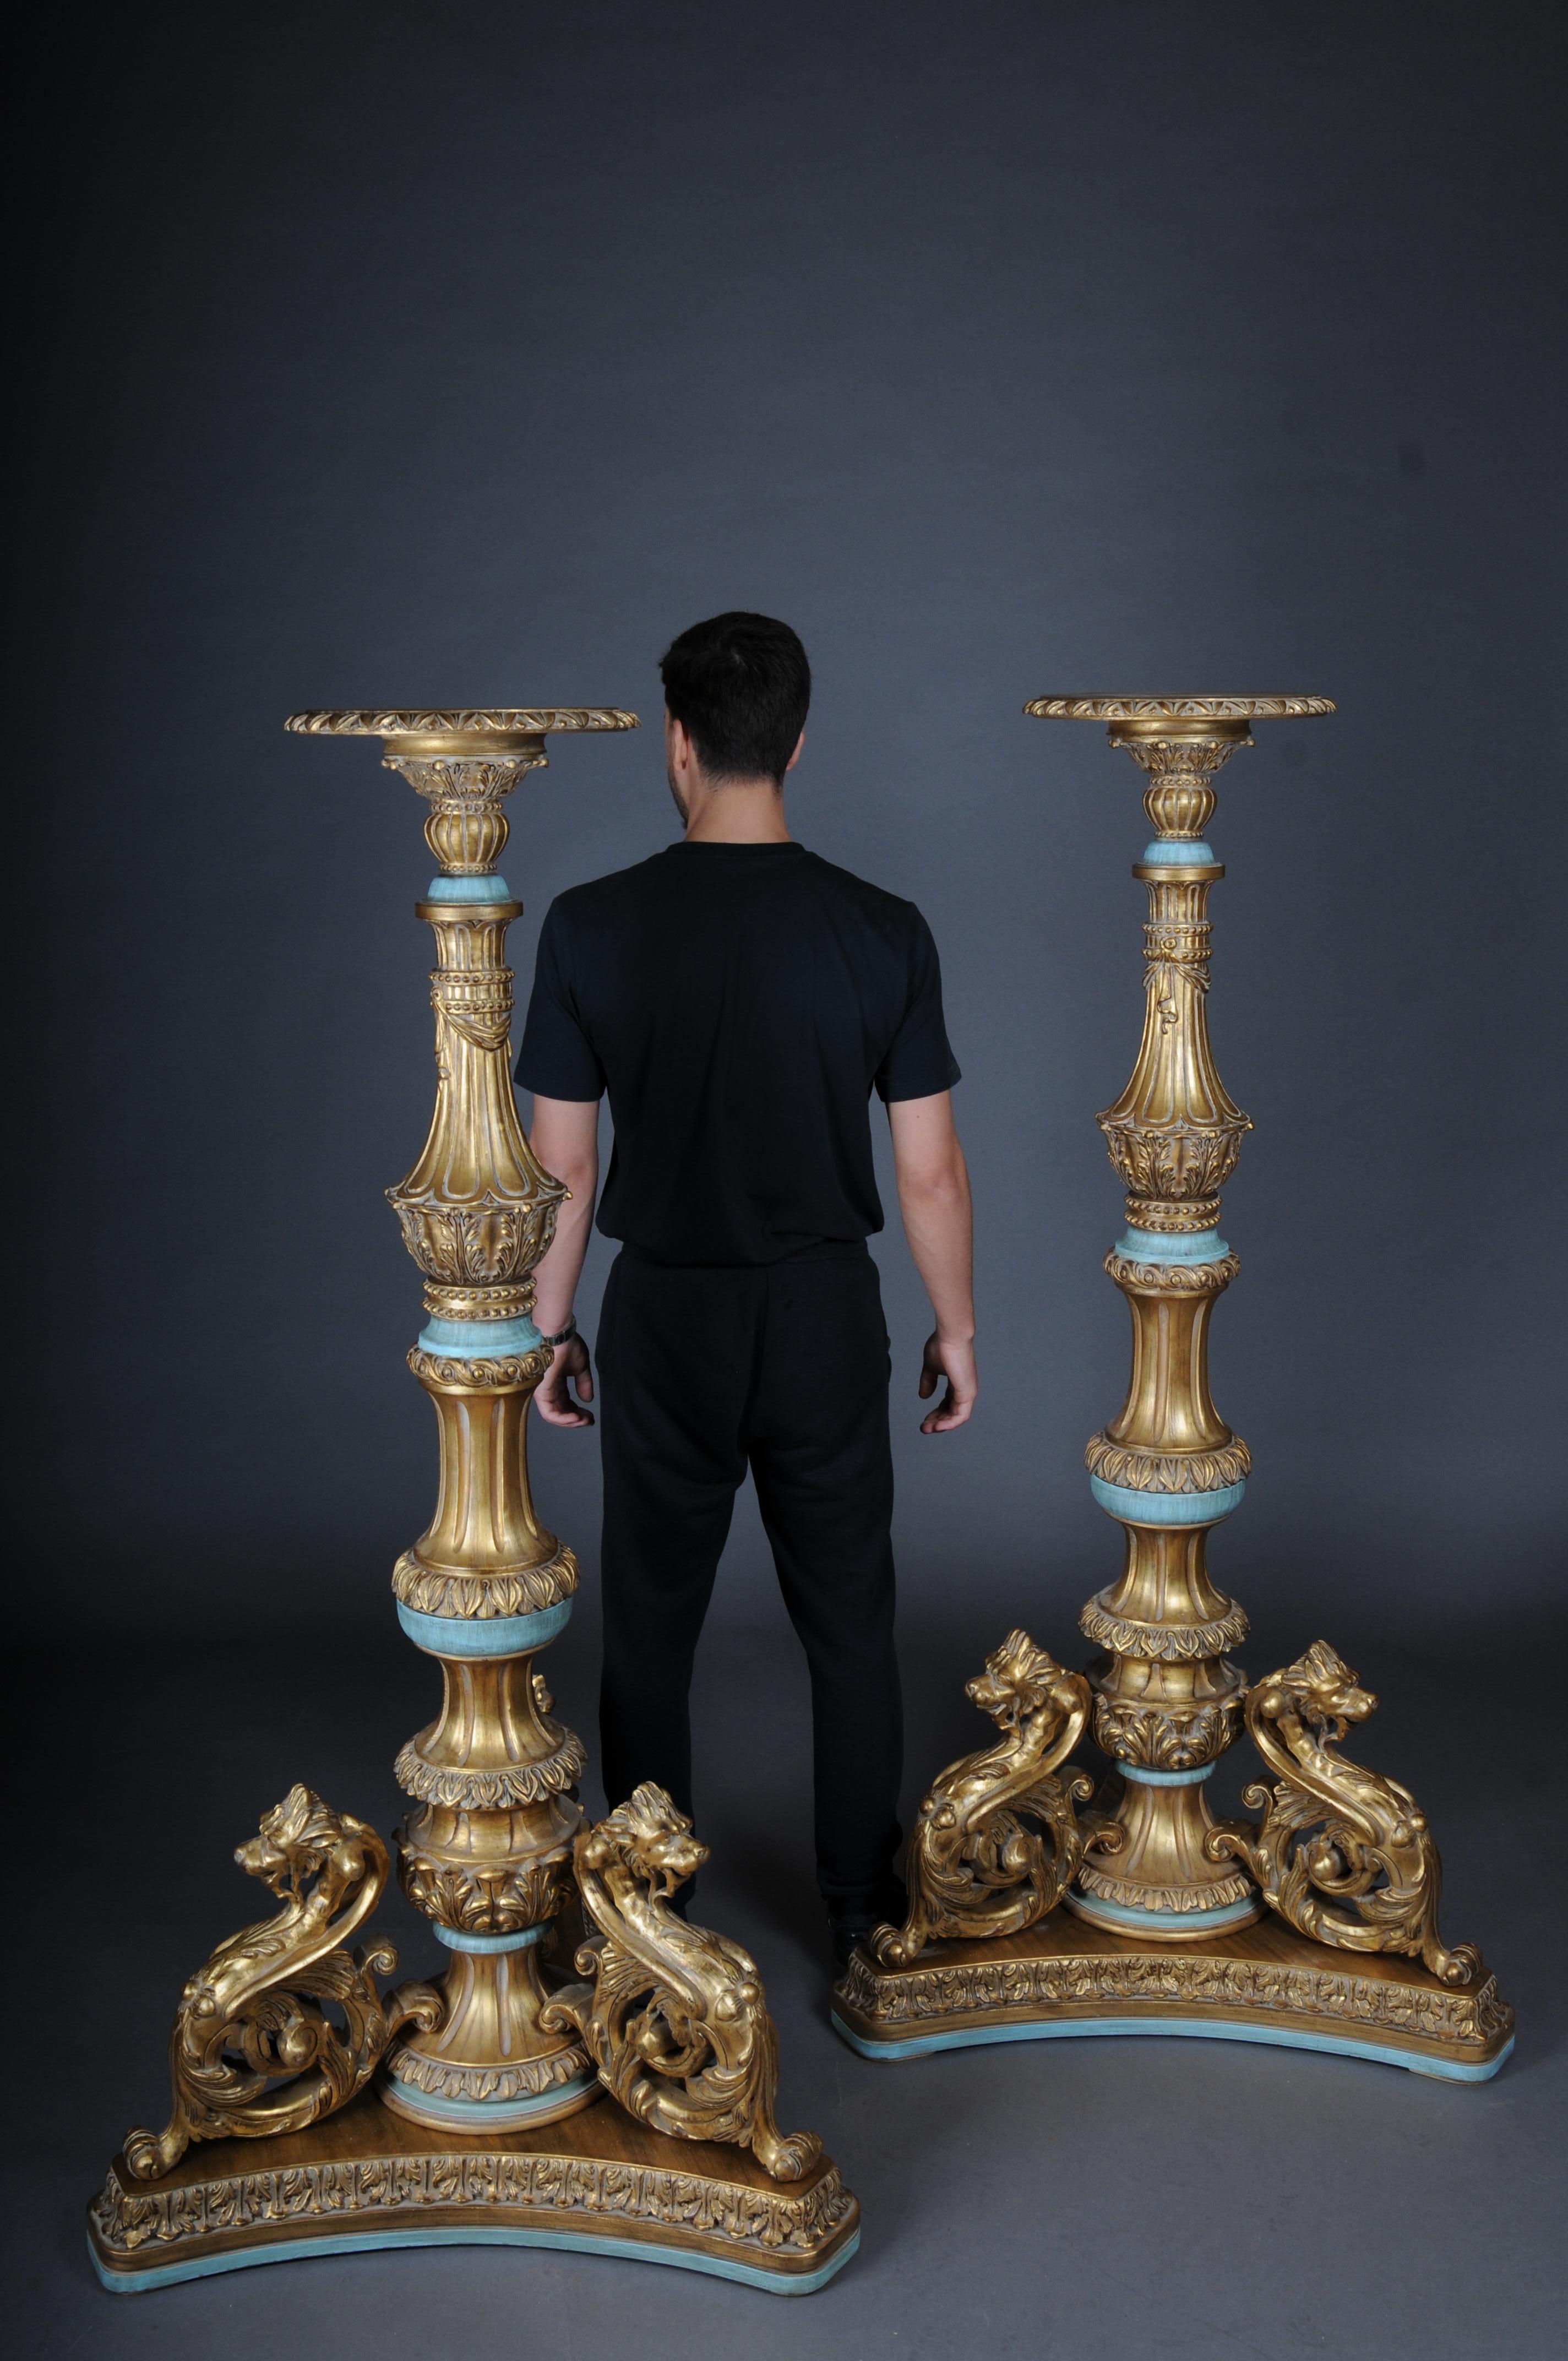 Royal Empire column pedestal, solid wood gold

Solid beech wood, very finely hand-carved and gilded in breathtaking top quality. Very complex and intricate carving. Wide stand with three fully dimensioned chimeras. High, multi-stepped balustrade